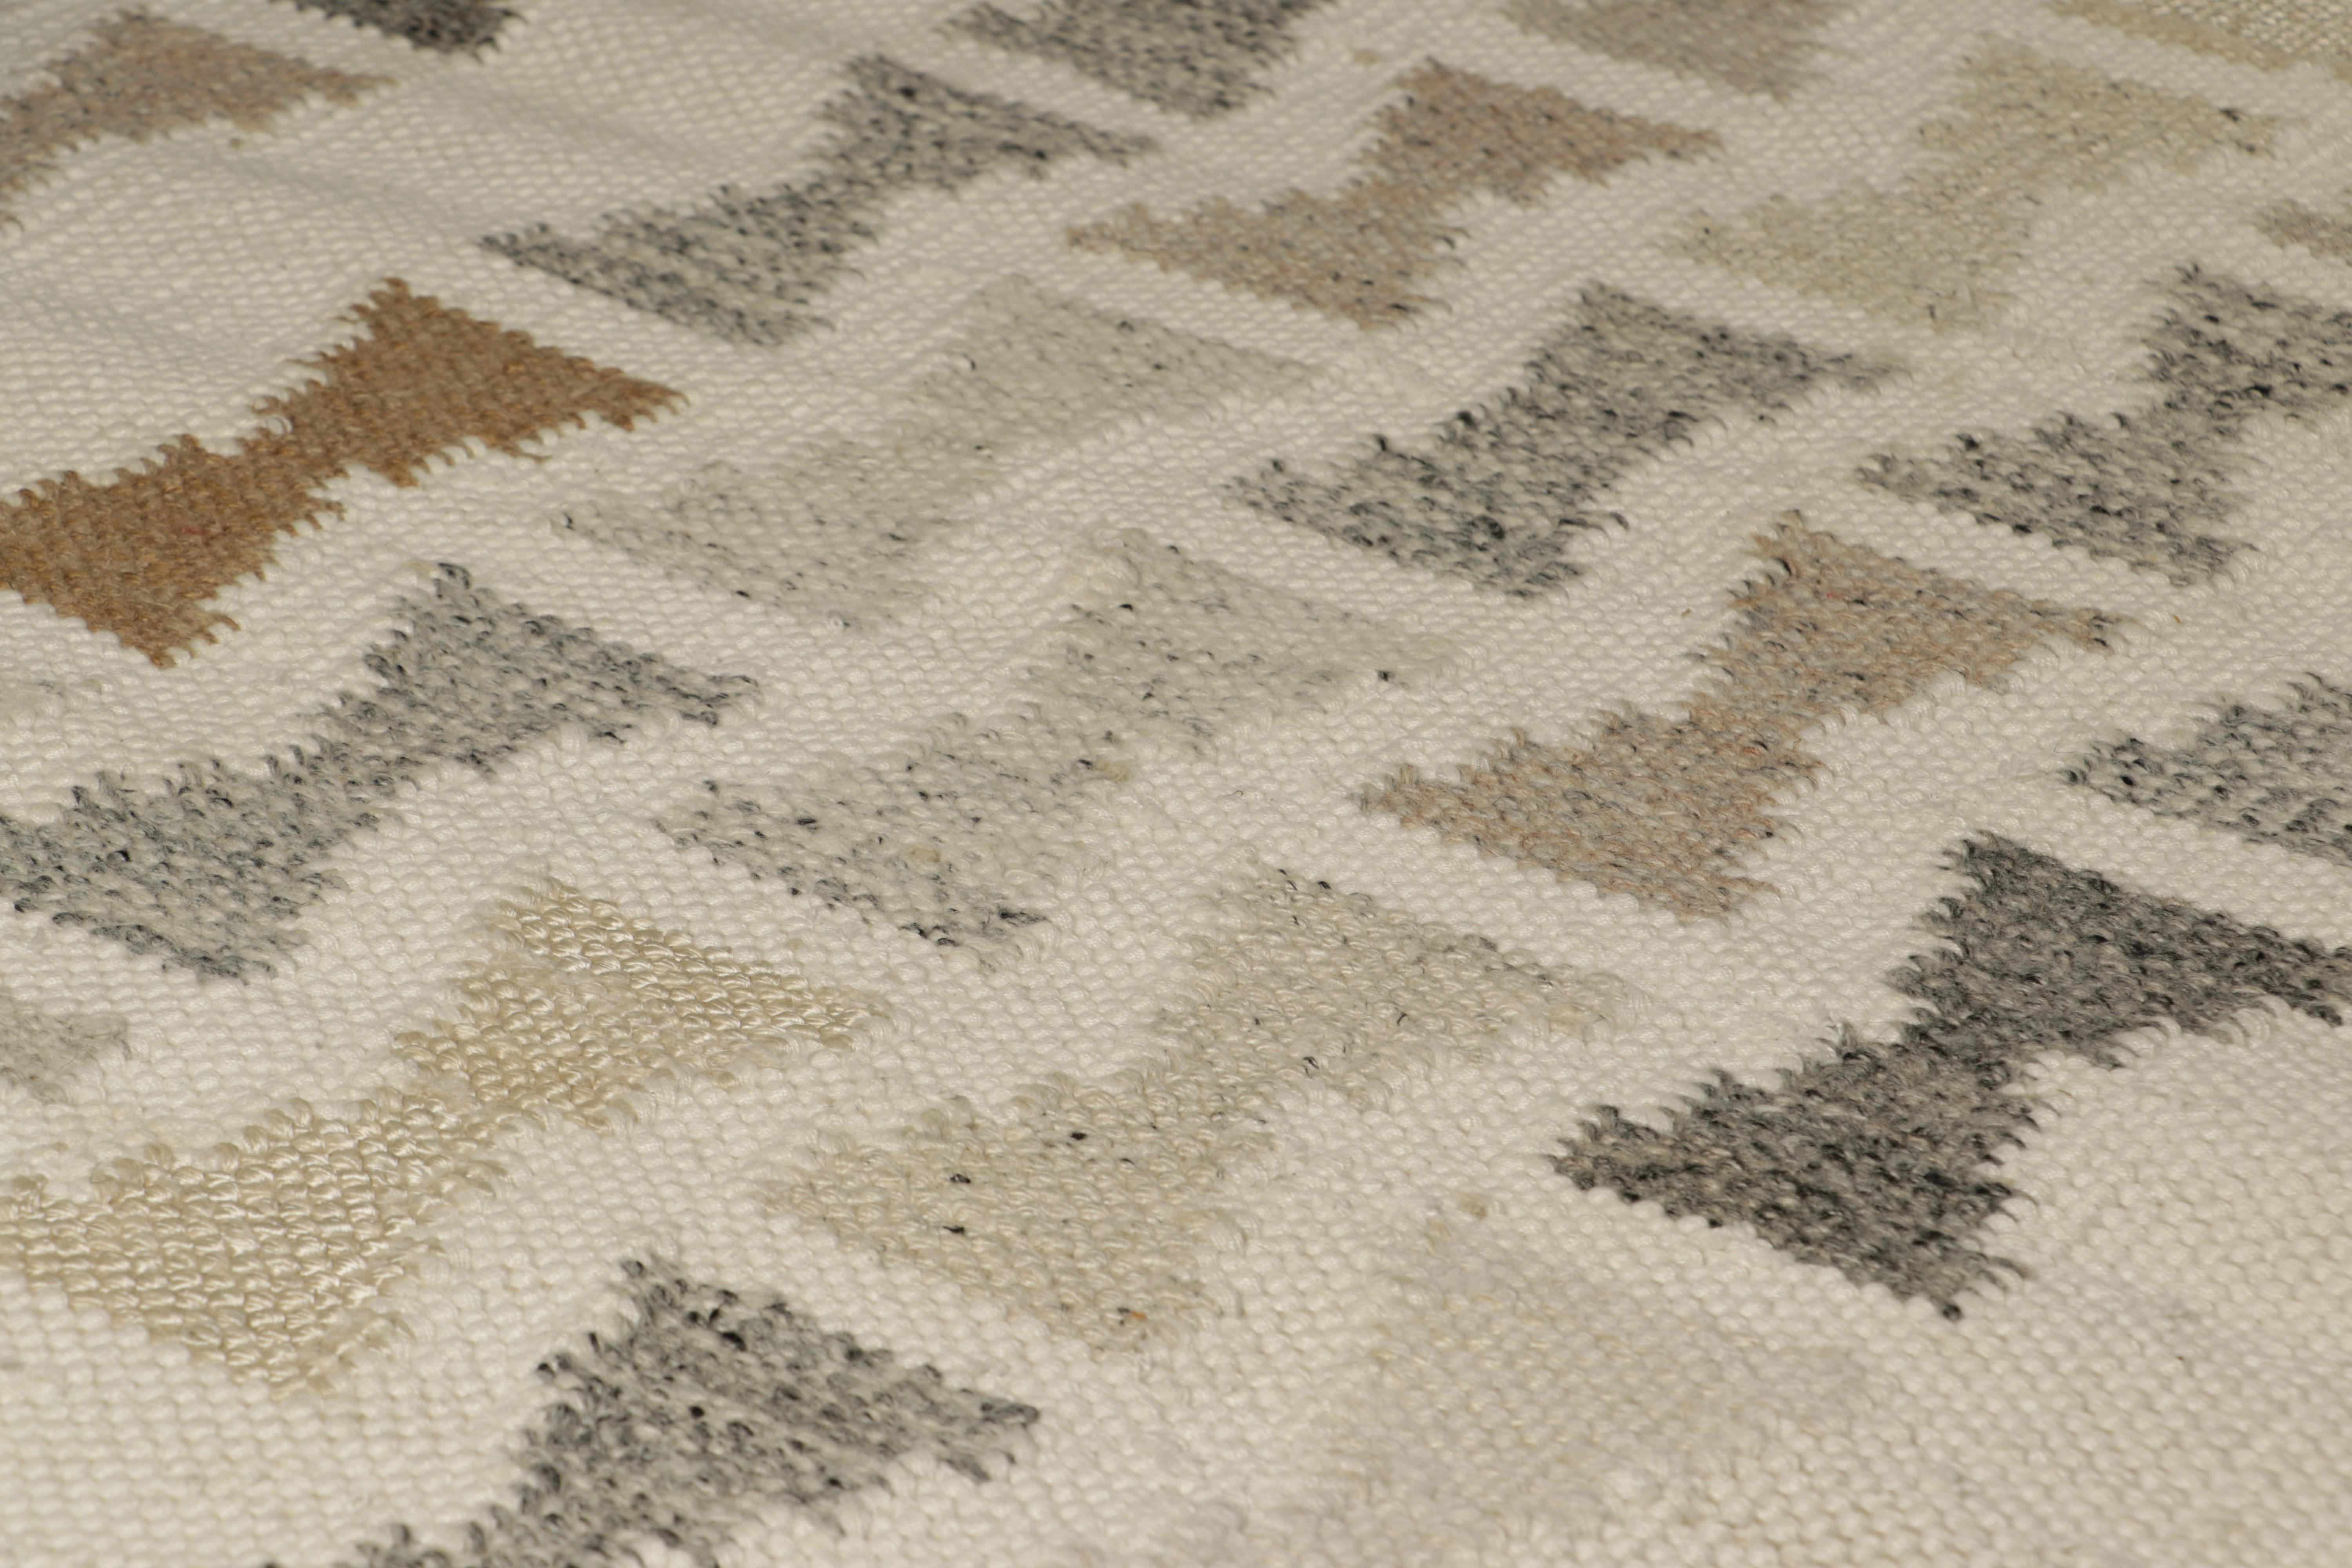 From an exciting new collection of gift-size pieces, this 3x5 Swedish-style accent rug is a bold new addition to the Scandinavian Collection by Rug & Kilim. Handwoven in a wool flatweave with undyed natural yarns as well, its design is inspired by